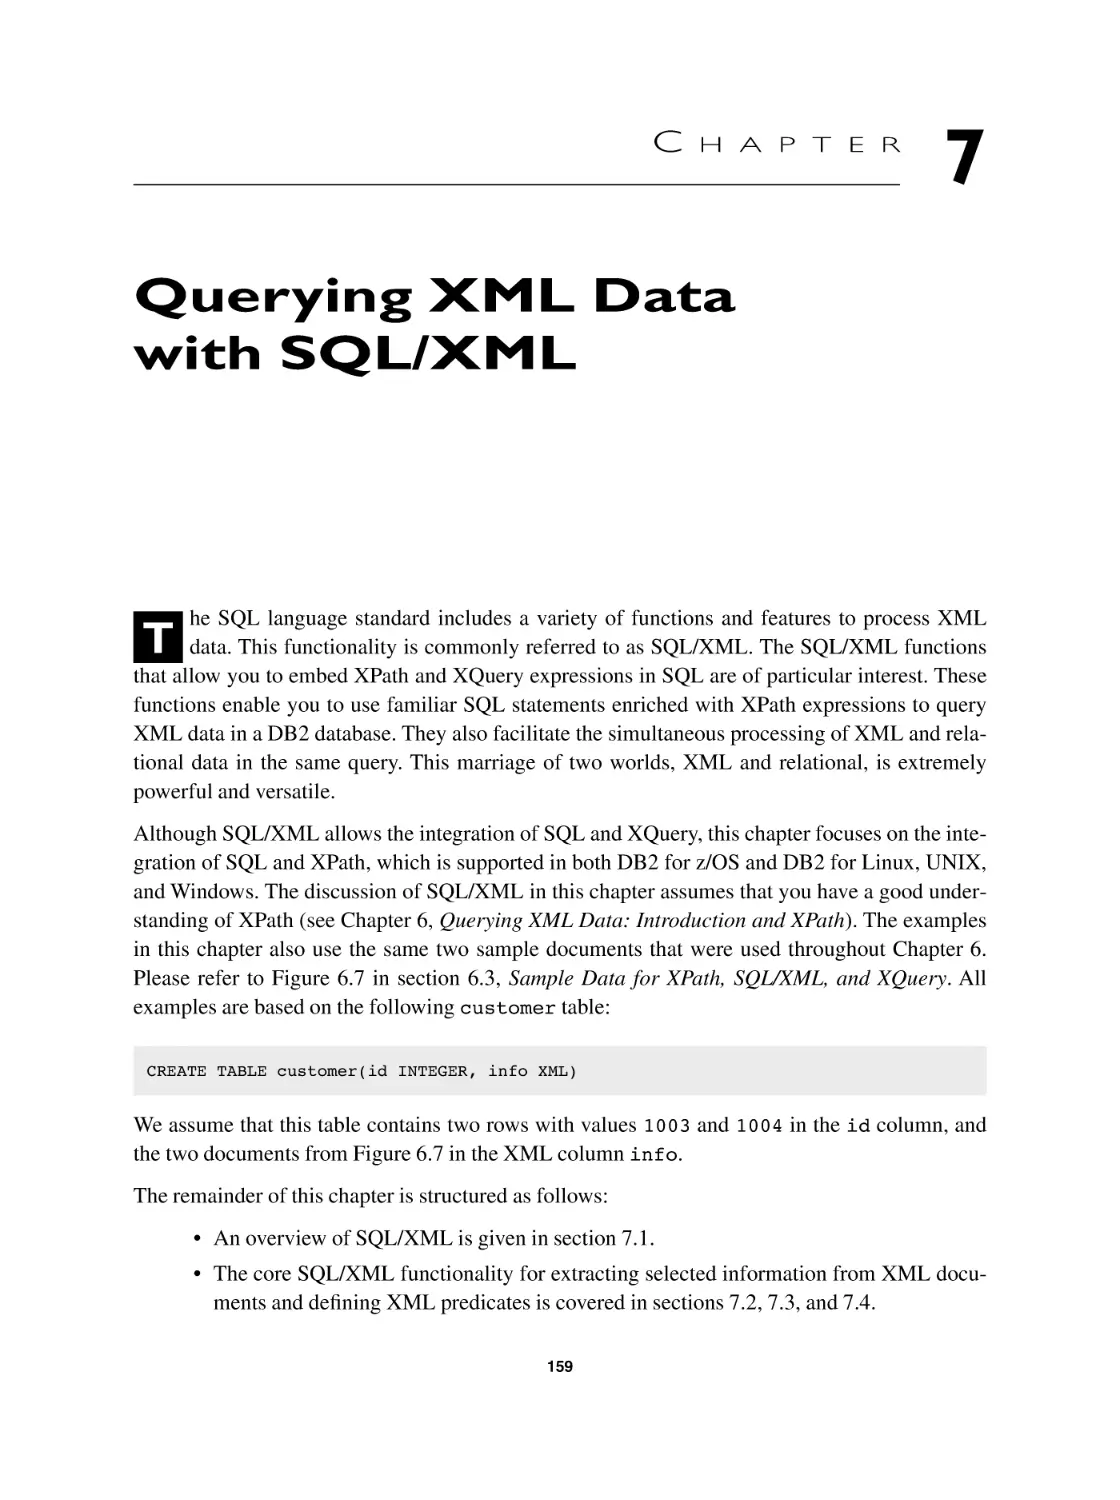 Chapter 7 Querying XML Data with SQL/XML